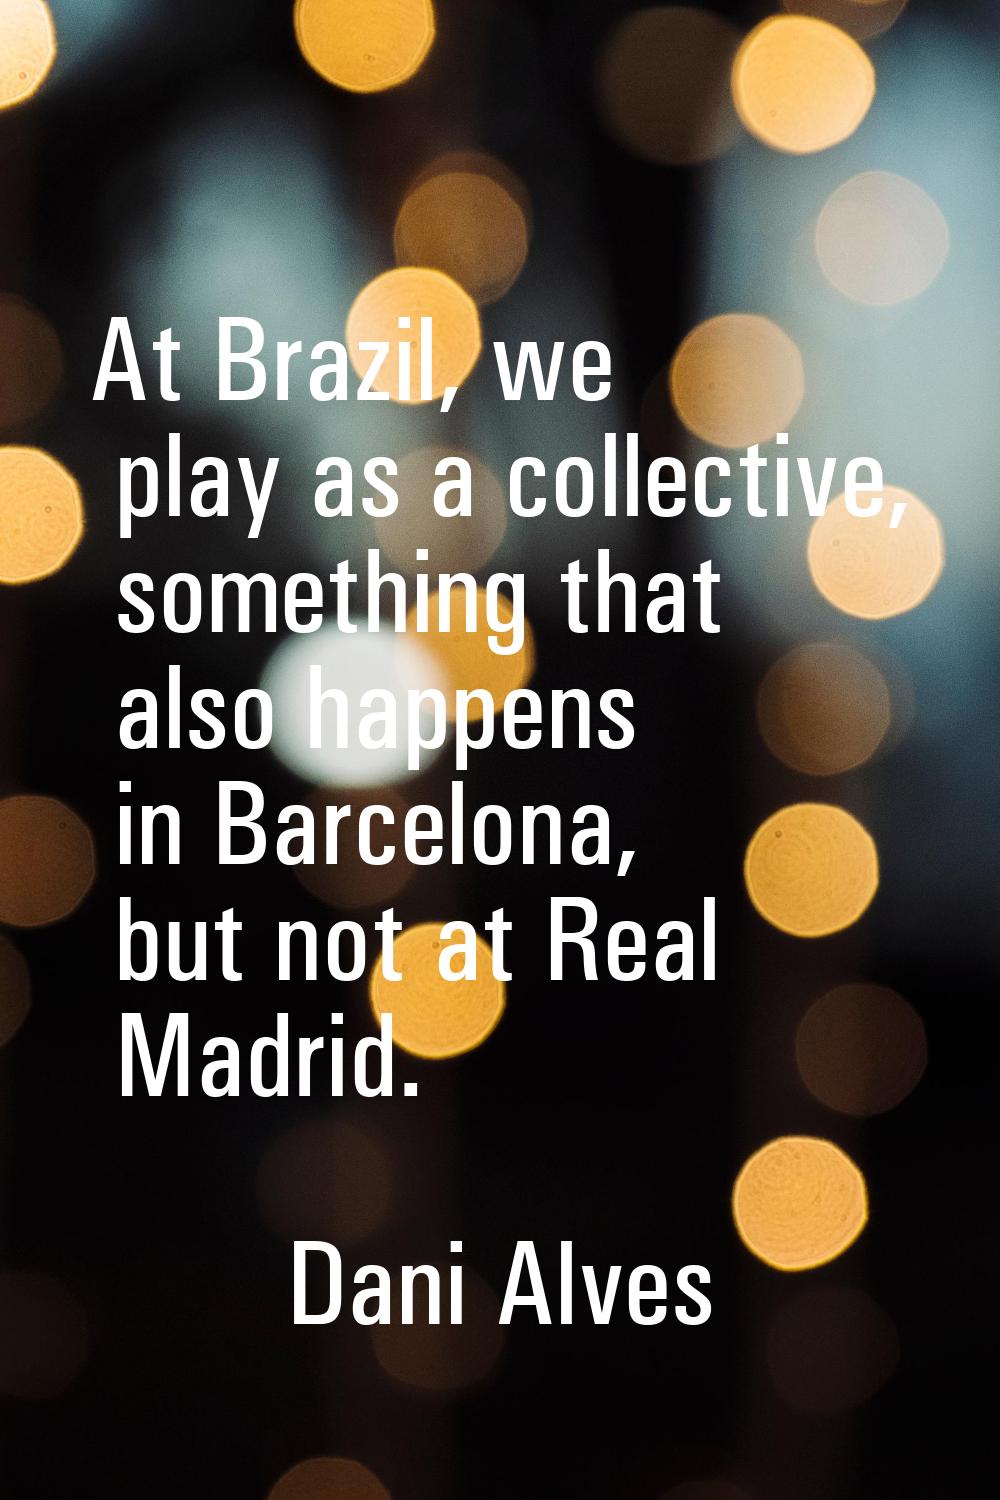 At Brazil, we play as a collective, something that also happens in Barcelona, but not at Real Madri